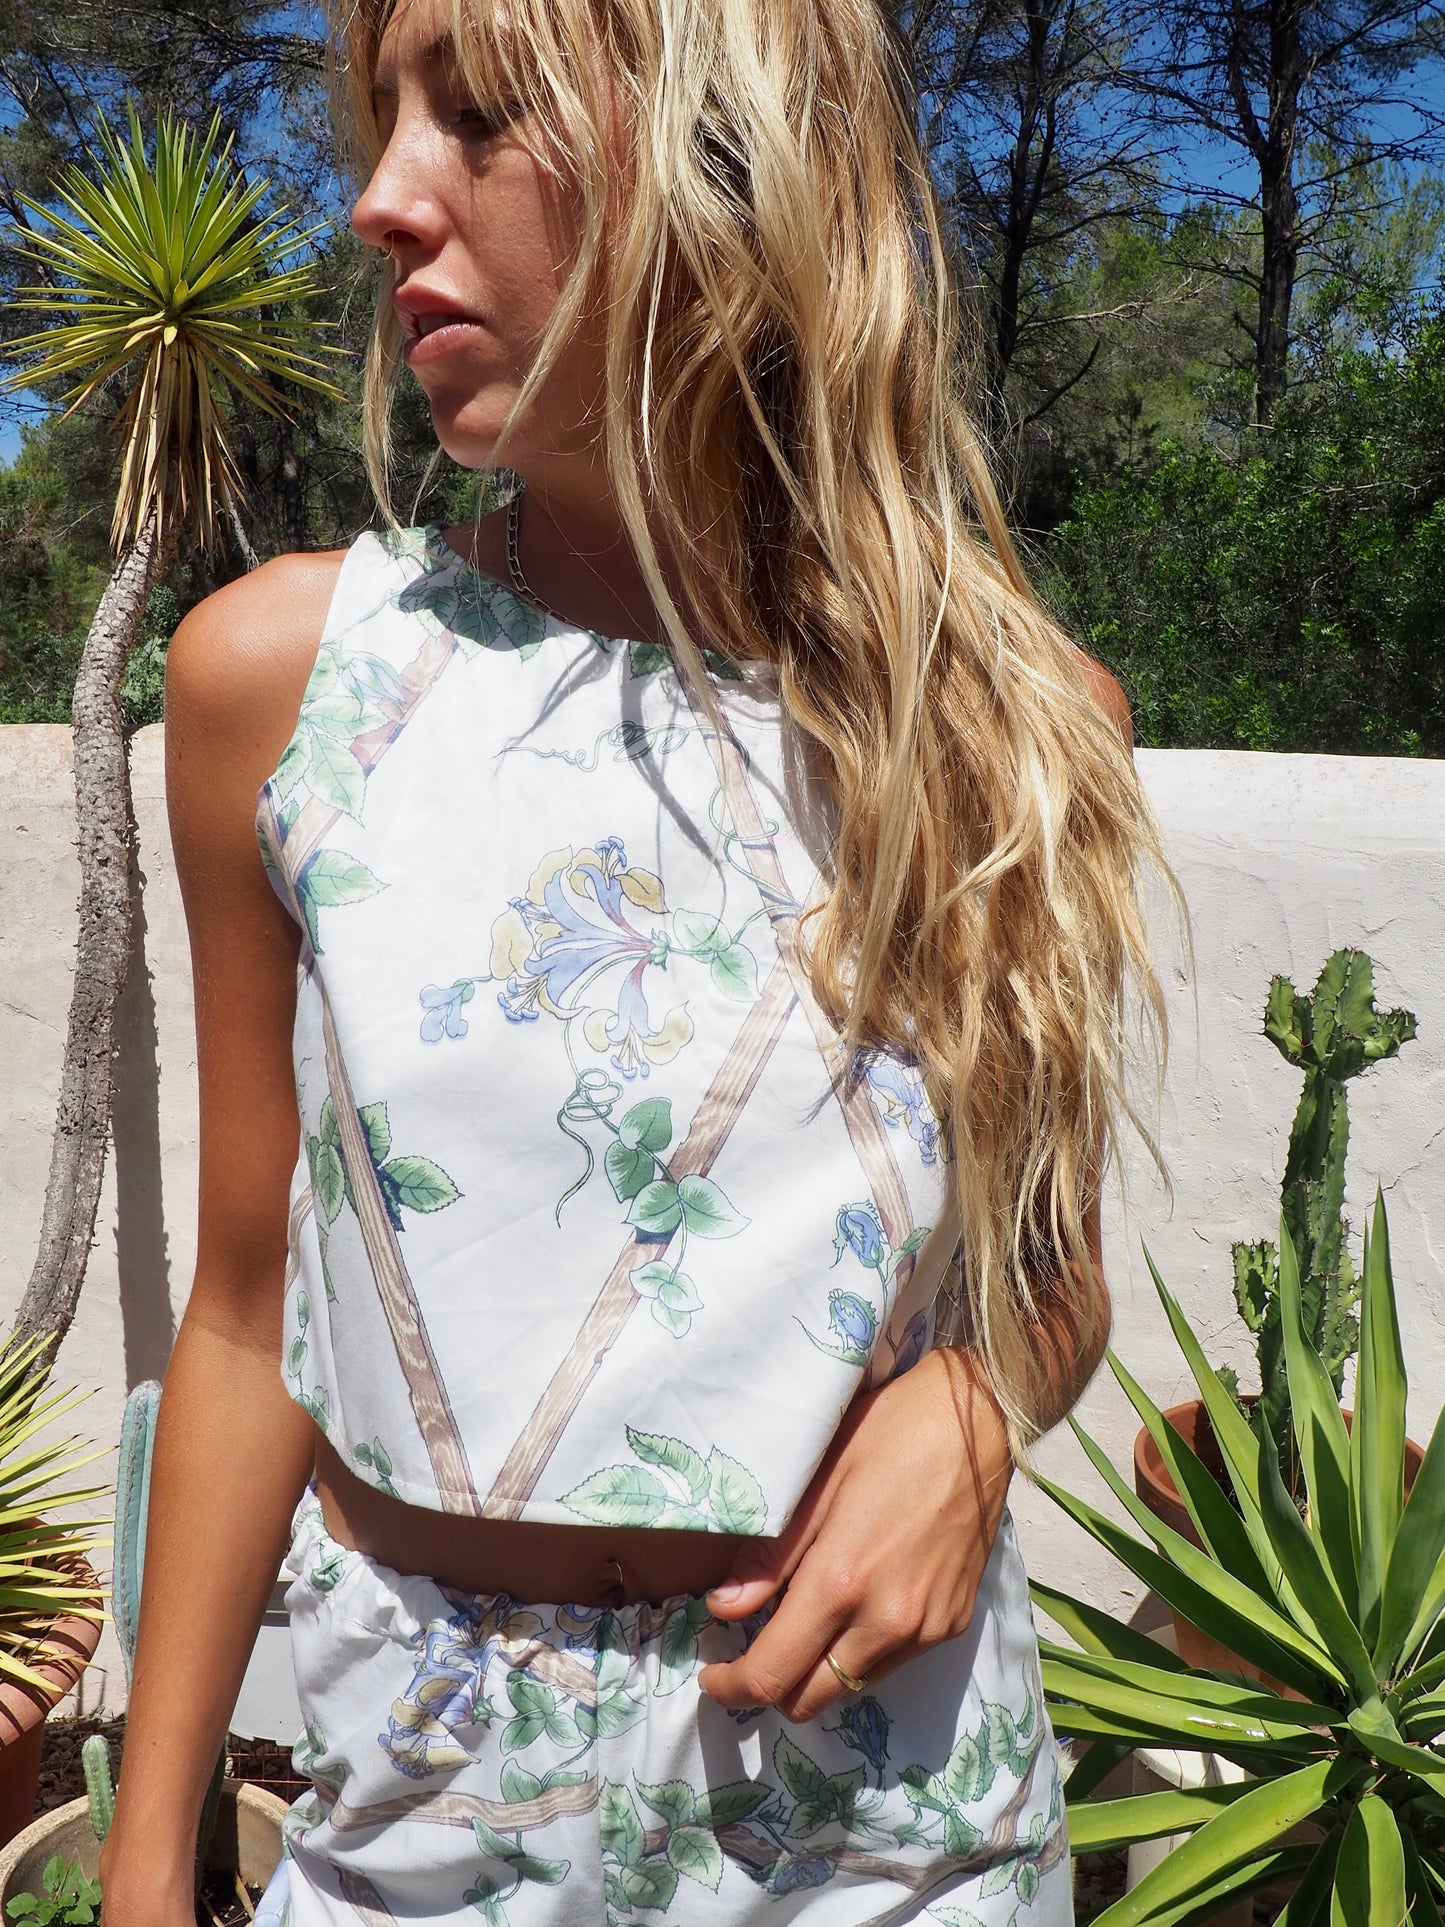 Up-cycled vintage garden floral printed textiles in white and blue crop top by Vagabond Ibiza in